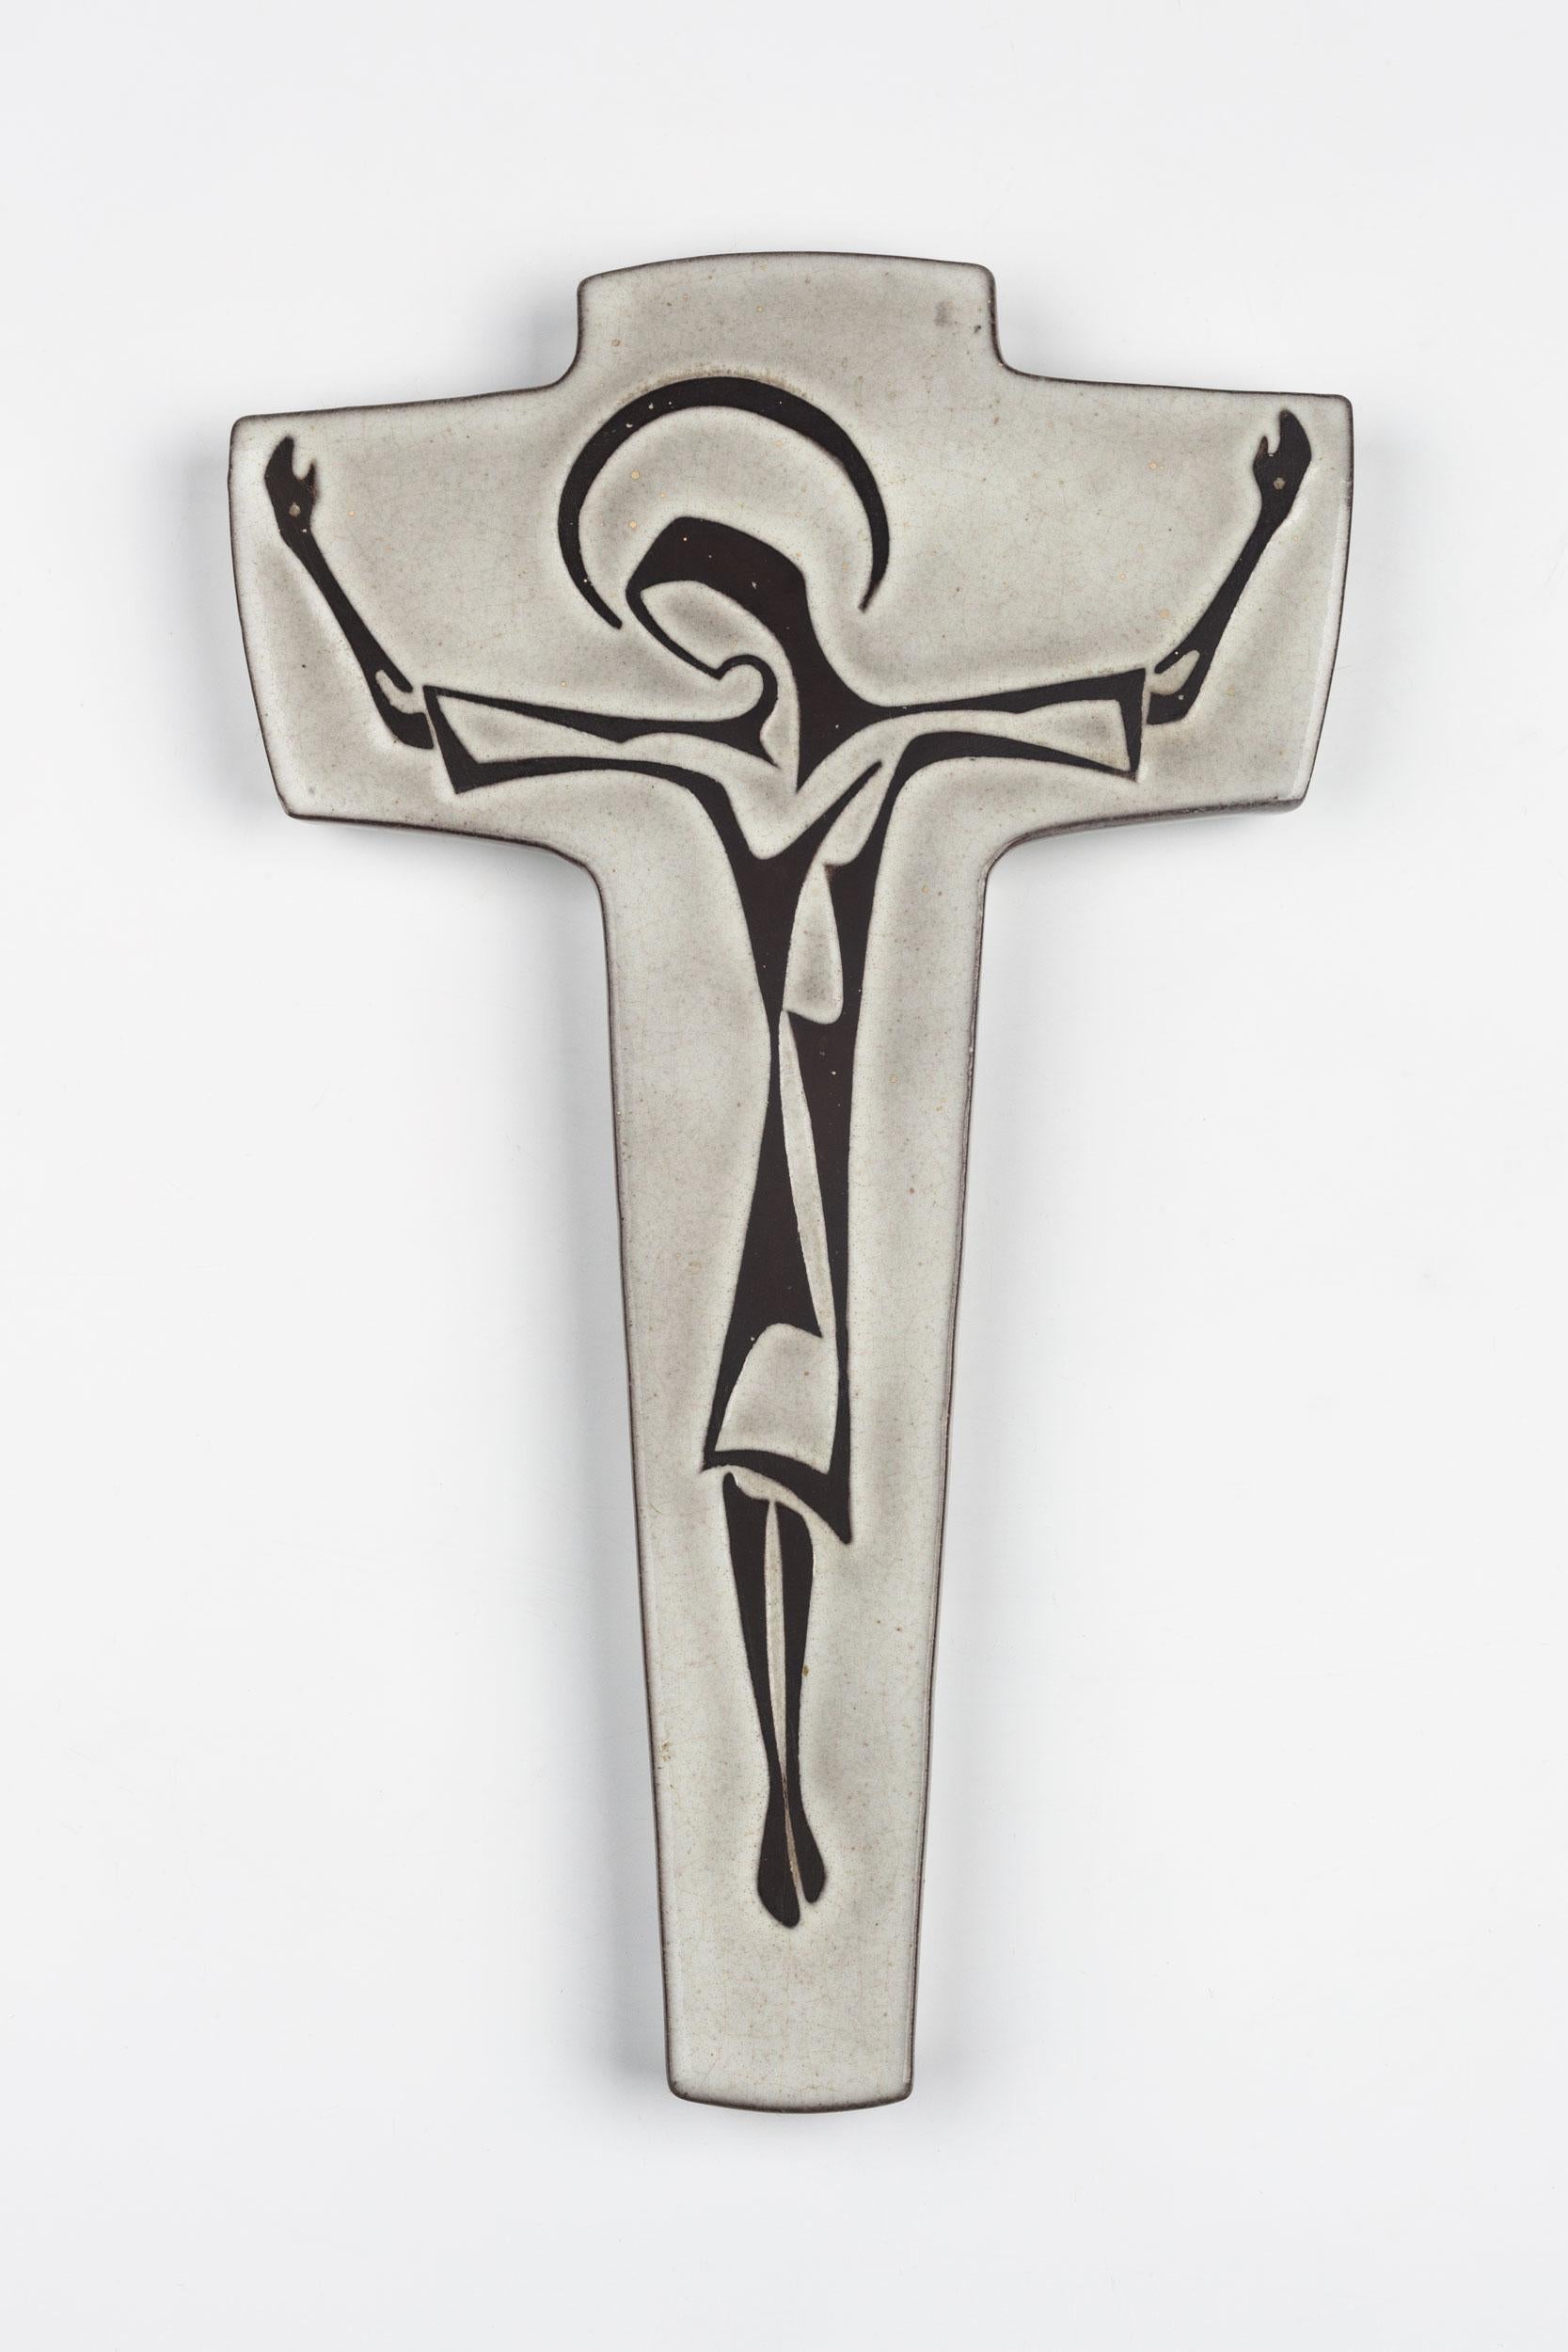 Mid-Century Modern, European crucifix in gray semi-glazed ceramic with christ figure drawing in dark brown. Handmade made in Belgium in the 1980s. 

This piece is part of a large ceramic crucifix collection, all made in Belgium between the 1950